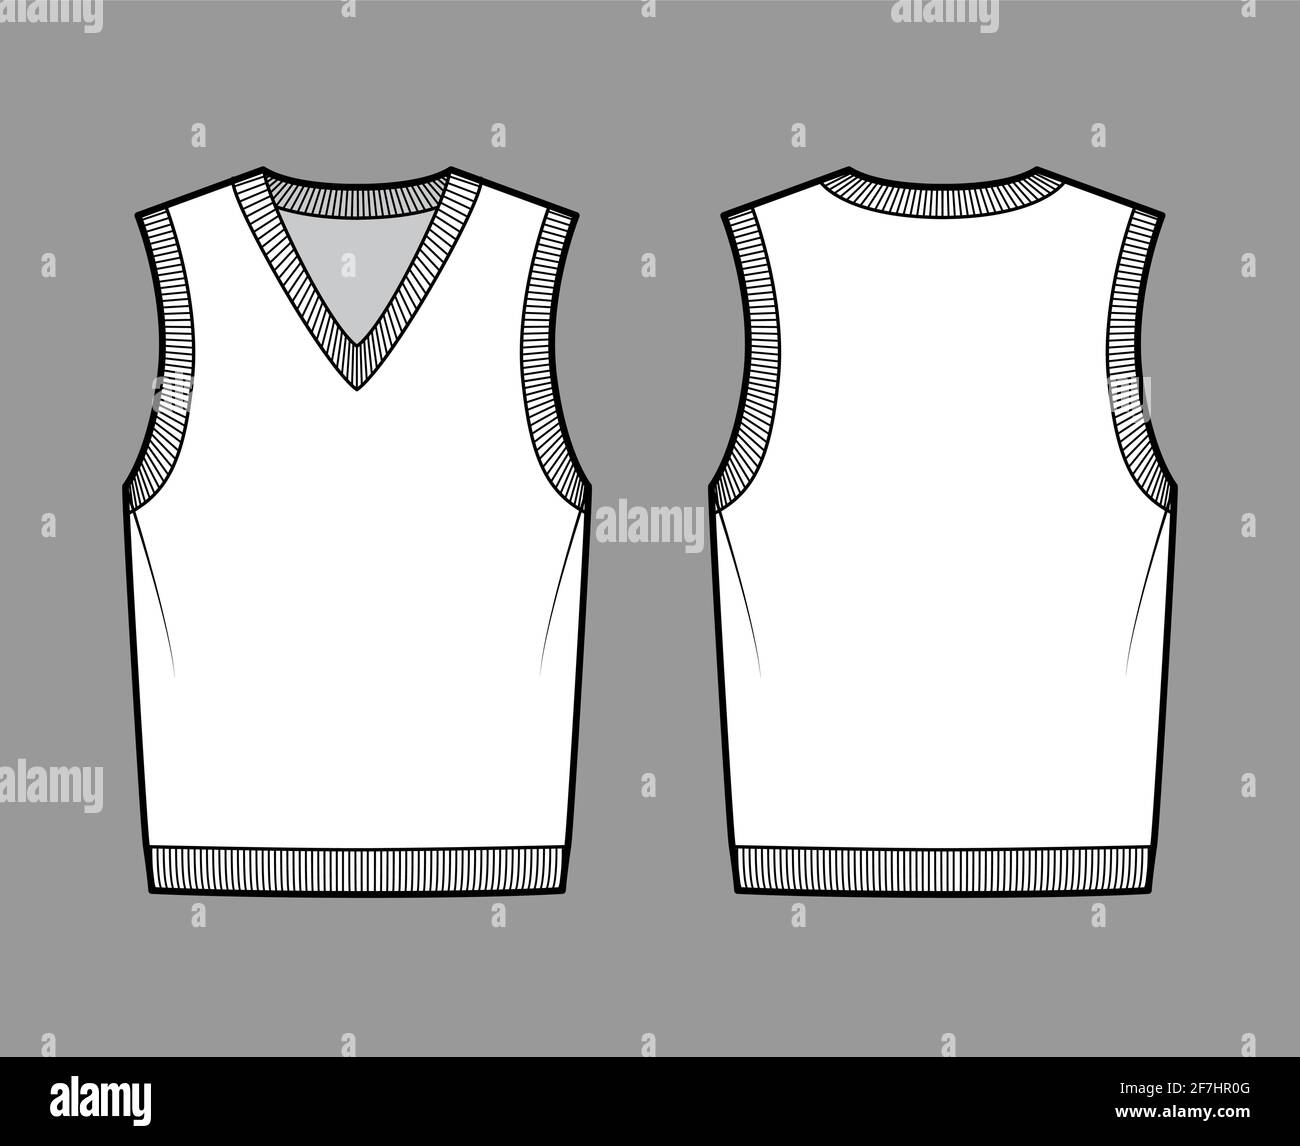 Pullover vest sweater waistcoat technical fashion illustration with sleeveless, rib knit V-neckline, oversized body. Flat template front, back, white color style. Women, men, unisex top CAD mockup Stock Vector